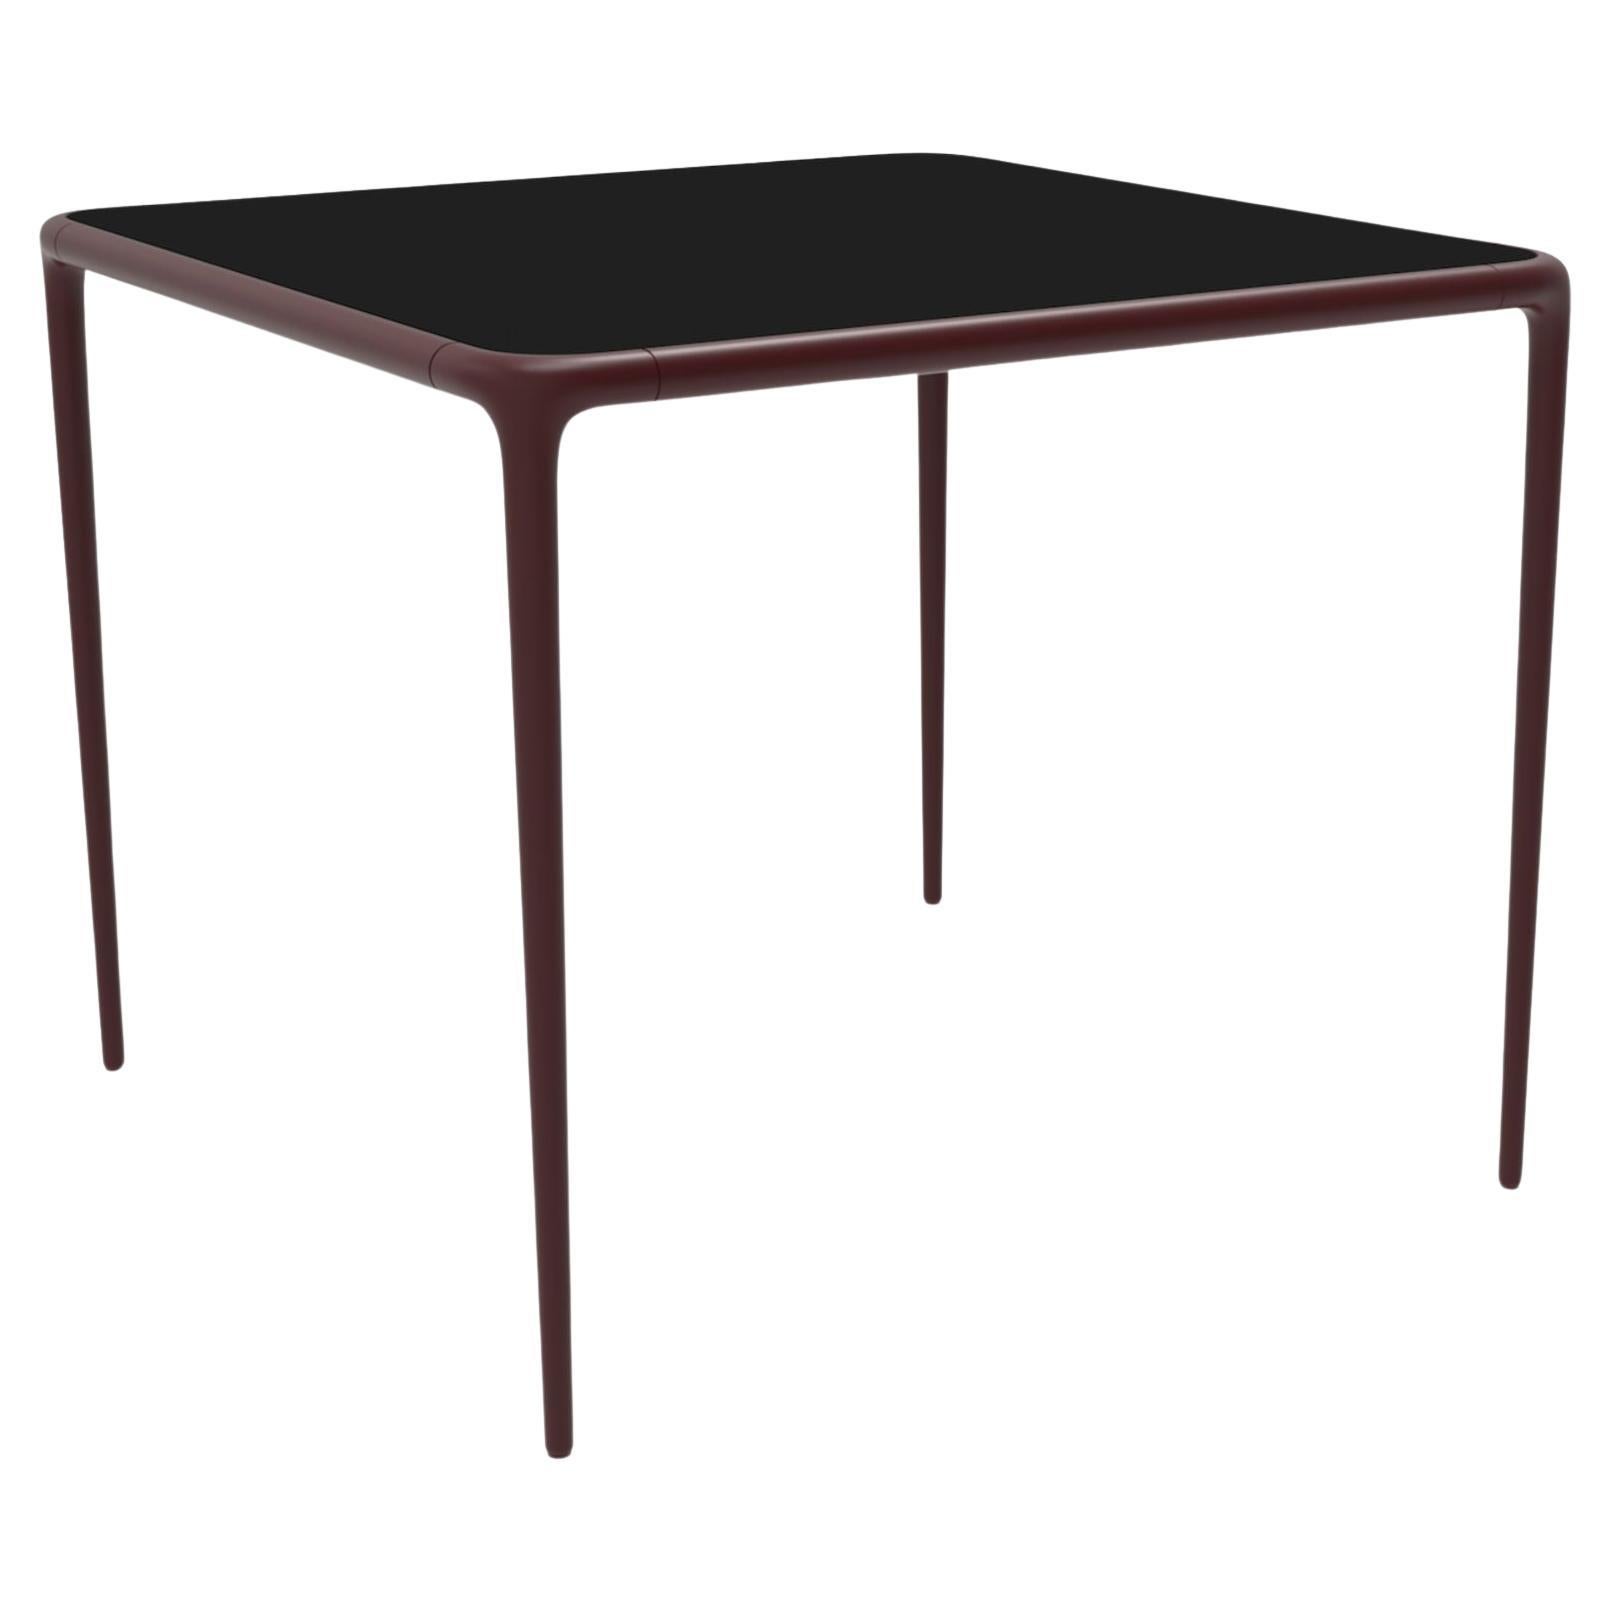 Xaloc Burgundy Glass Top Table 90 by Mowee For Sale